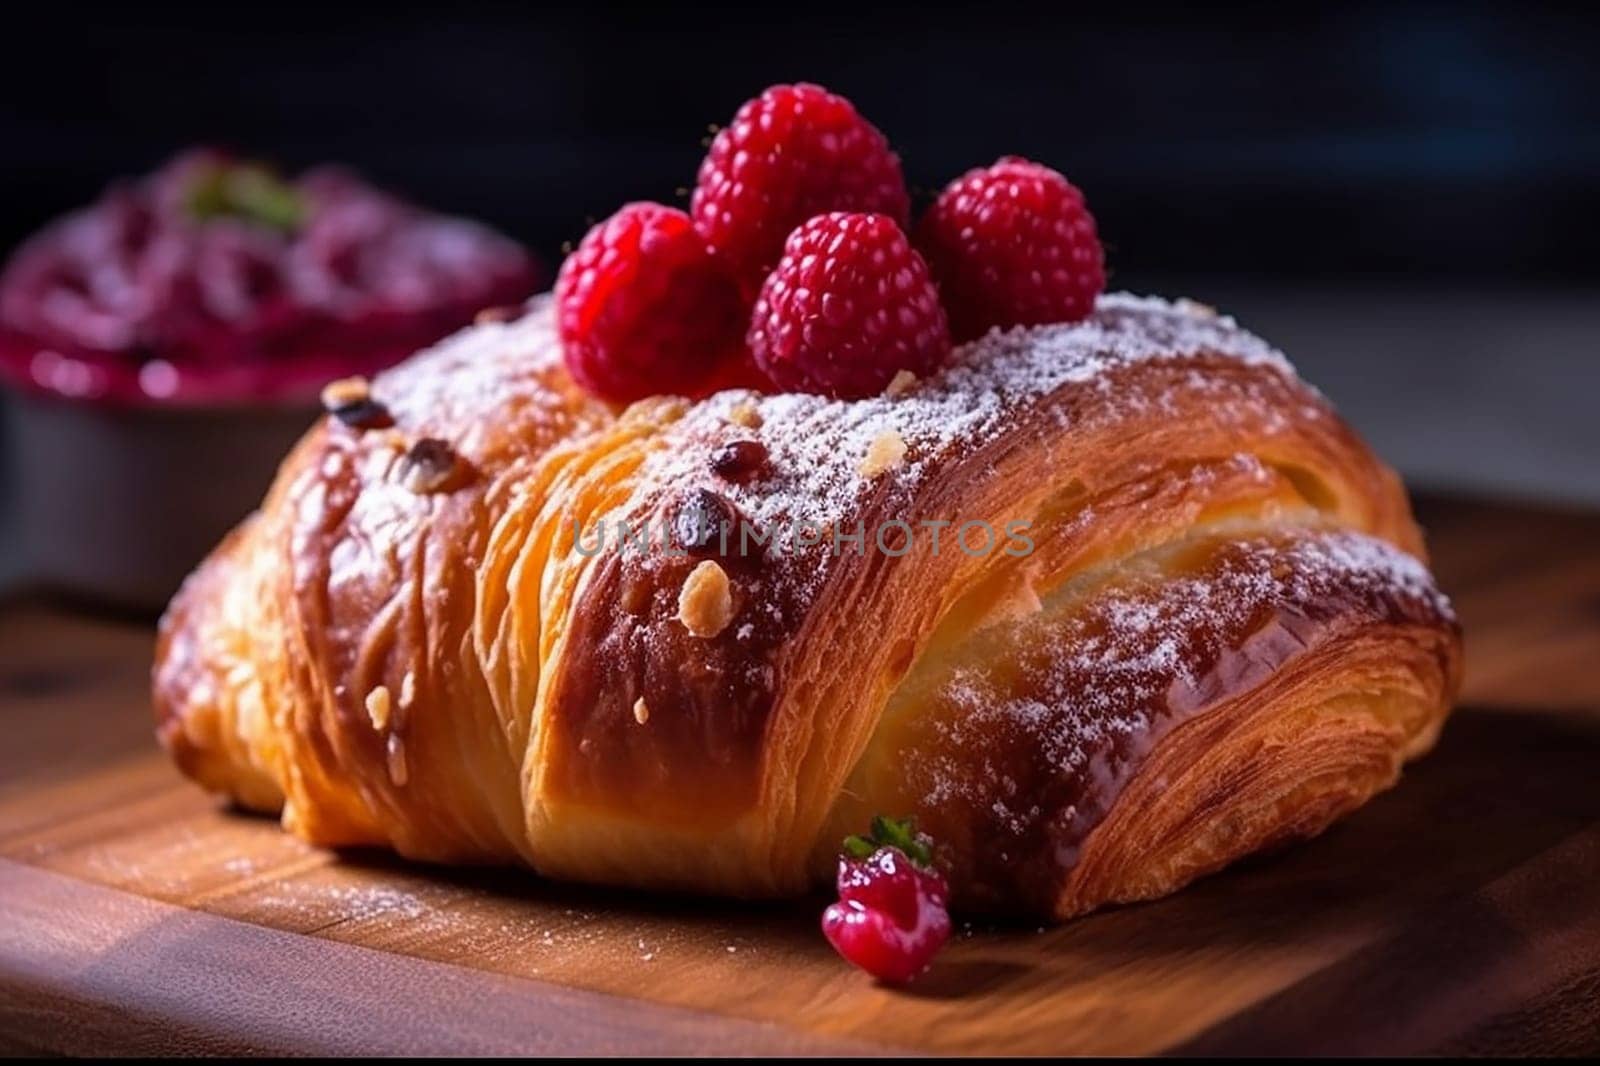 A flaky croissant topped with sugar and raspberries on a wooden surface by Hype2art